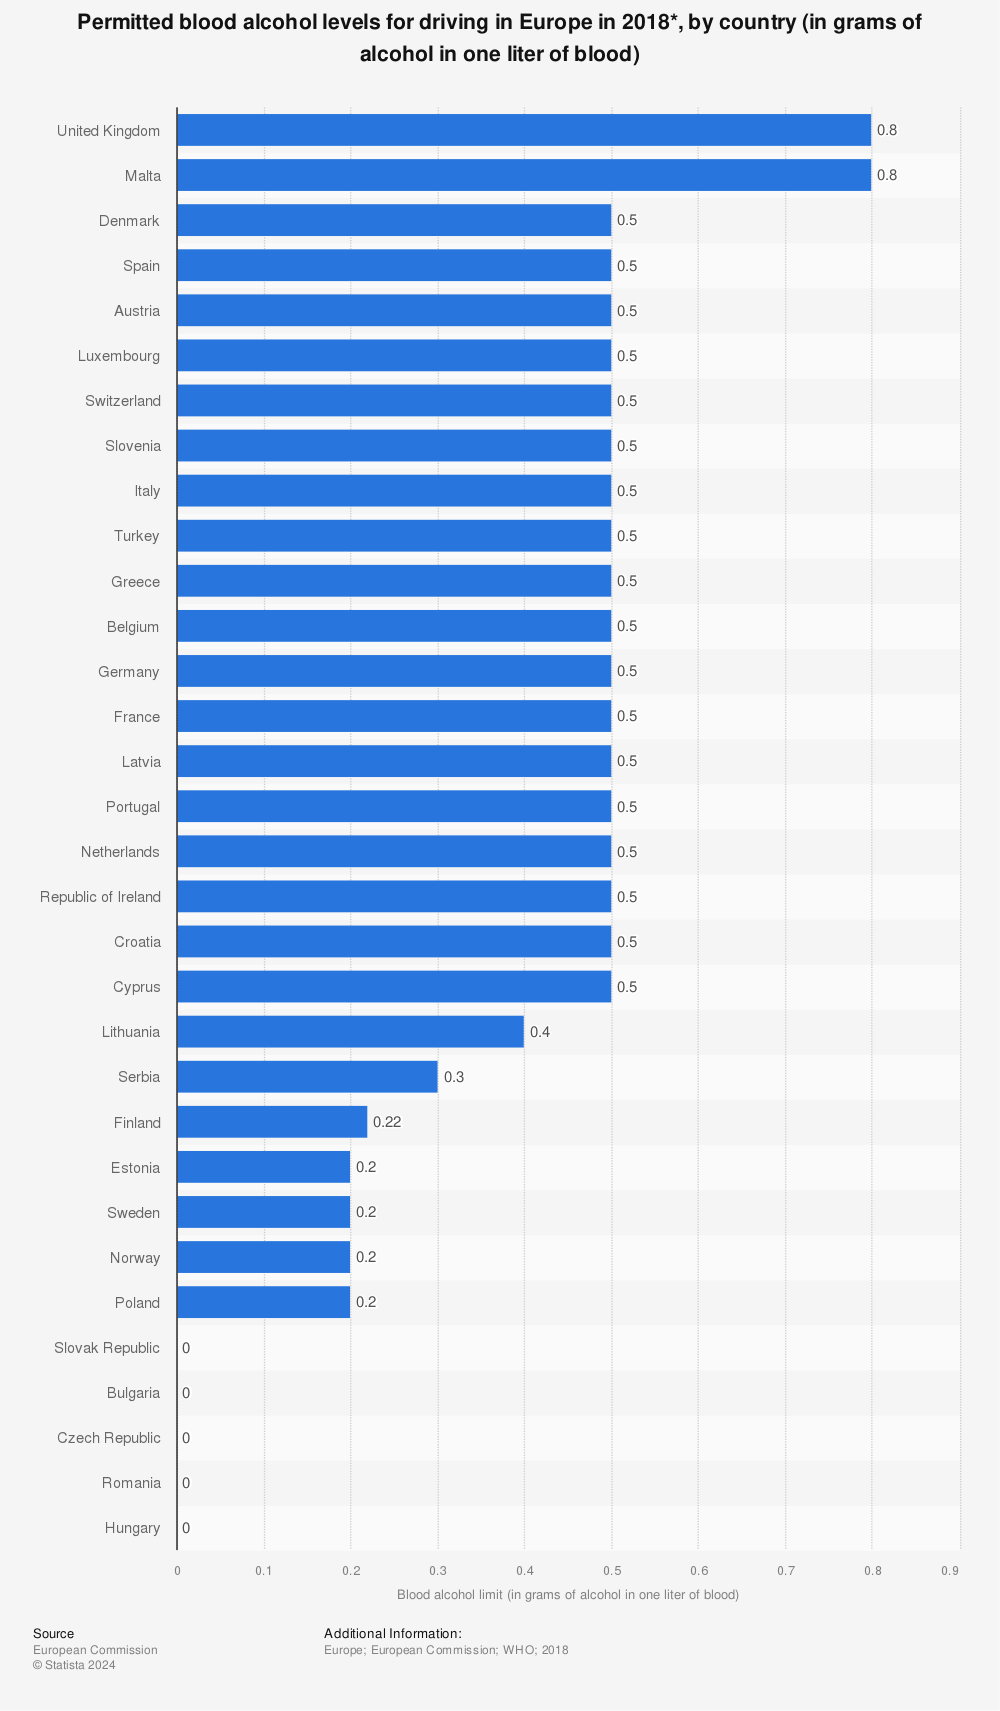 Statistic: Permitted blood alcohol levels for driving in Europe in 2018*, by country (in grams of alcohol in one liter of blood) | Statista